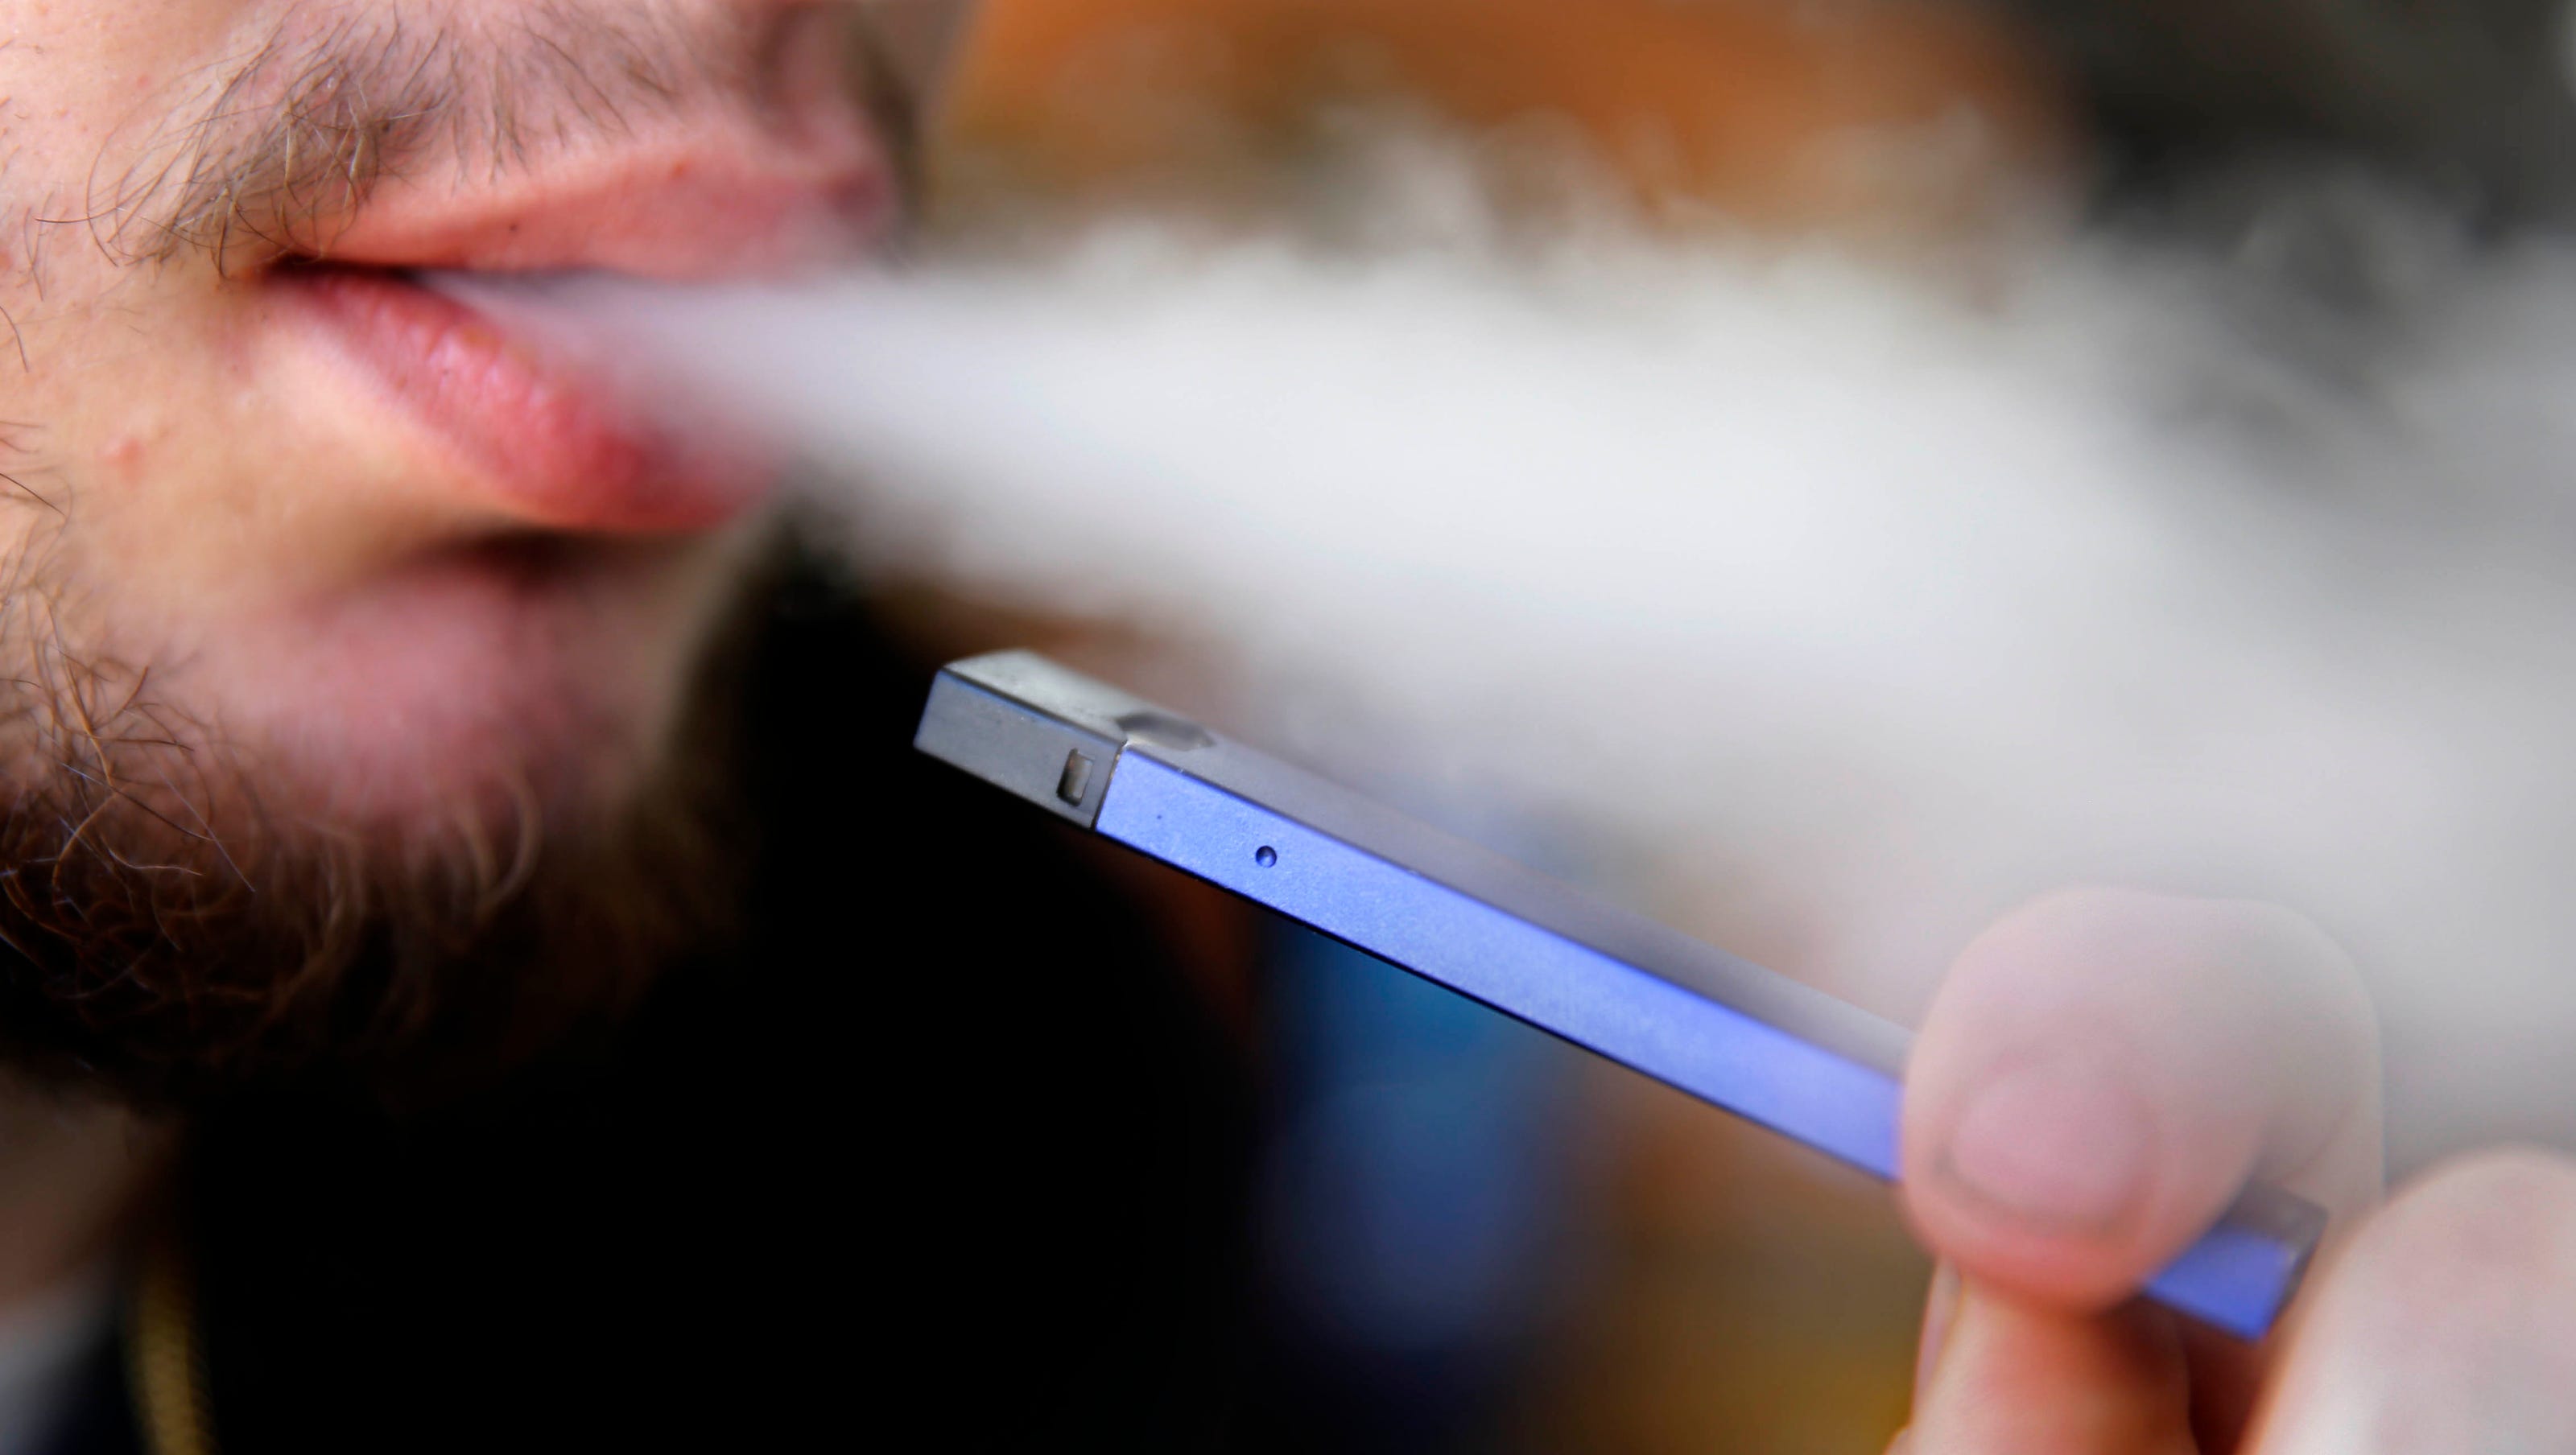 Juul vs vaping What parents need to know about the vaping device